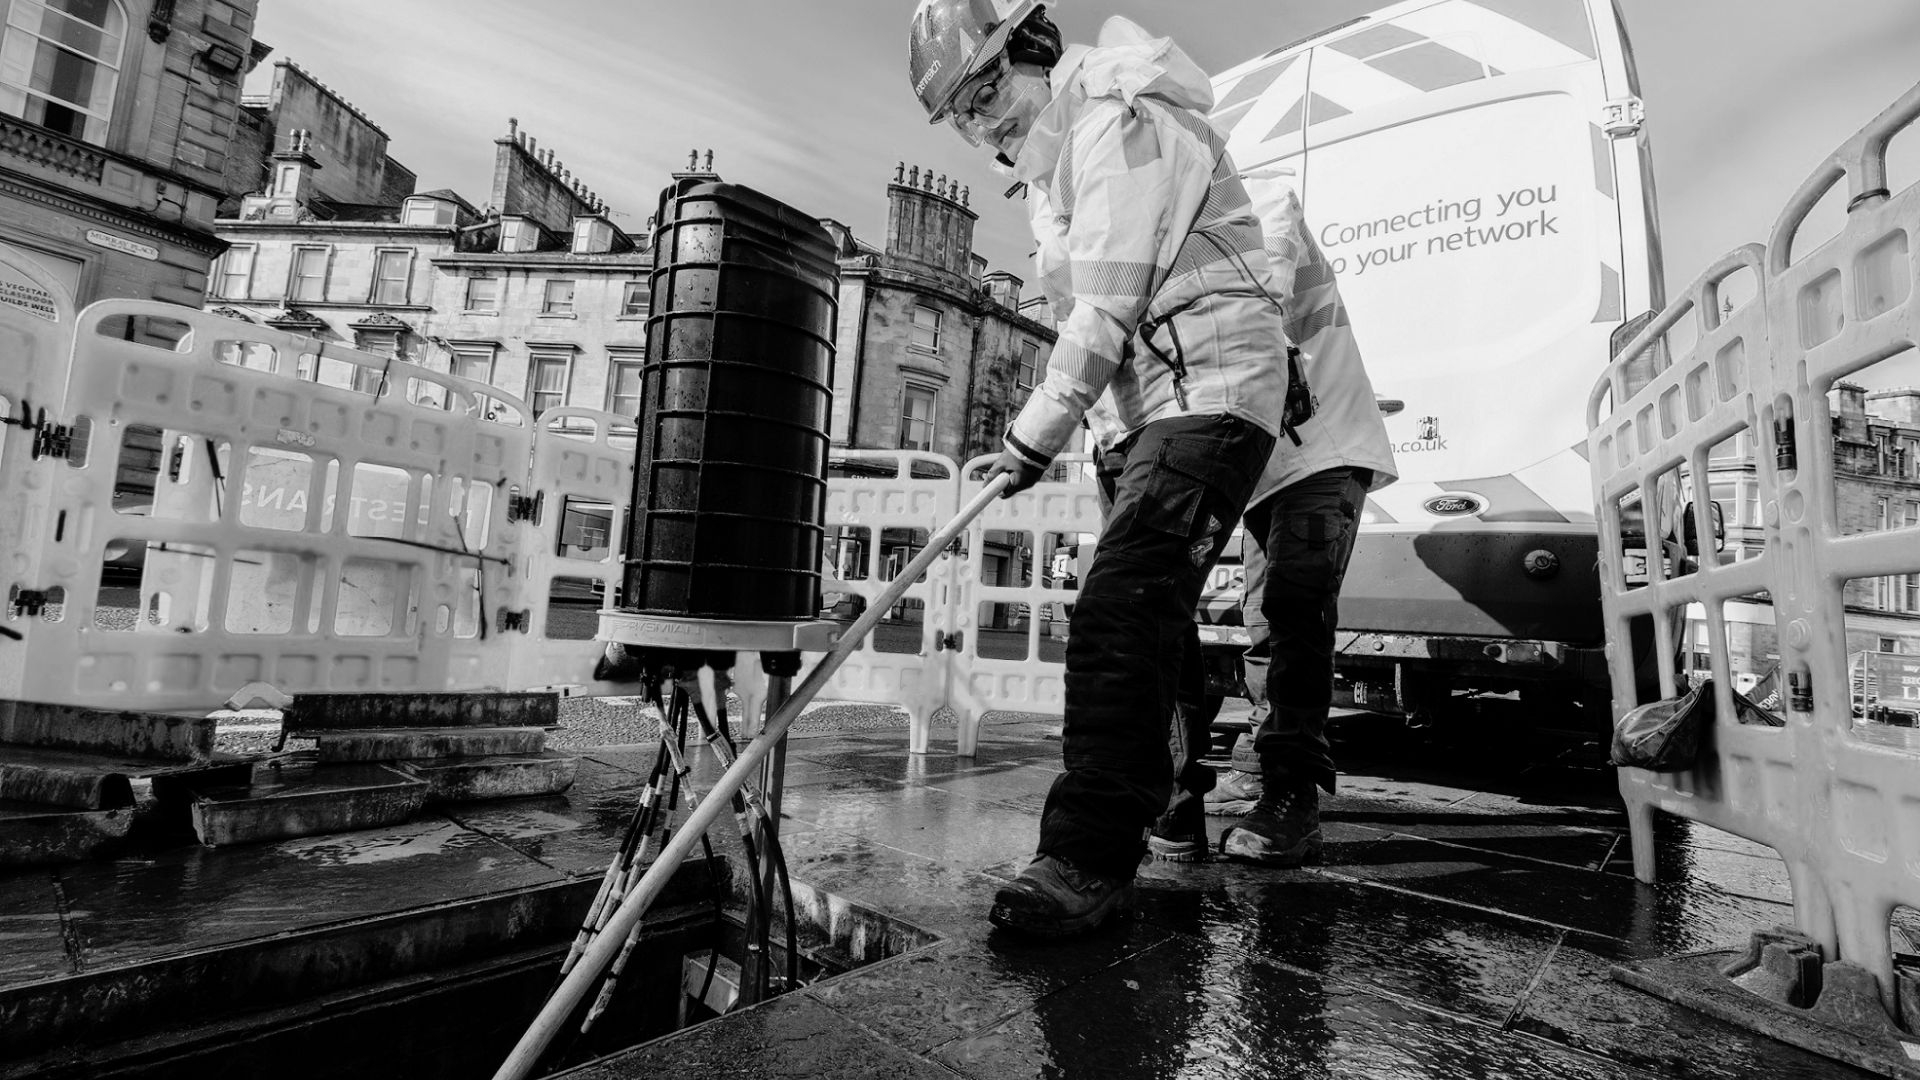 Openreach Initiates Ultrafast Broadband Network for Grimsby and Healing